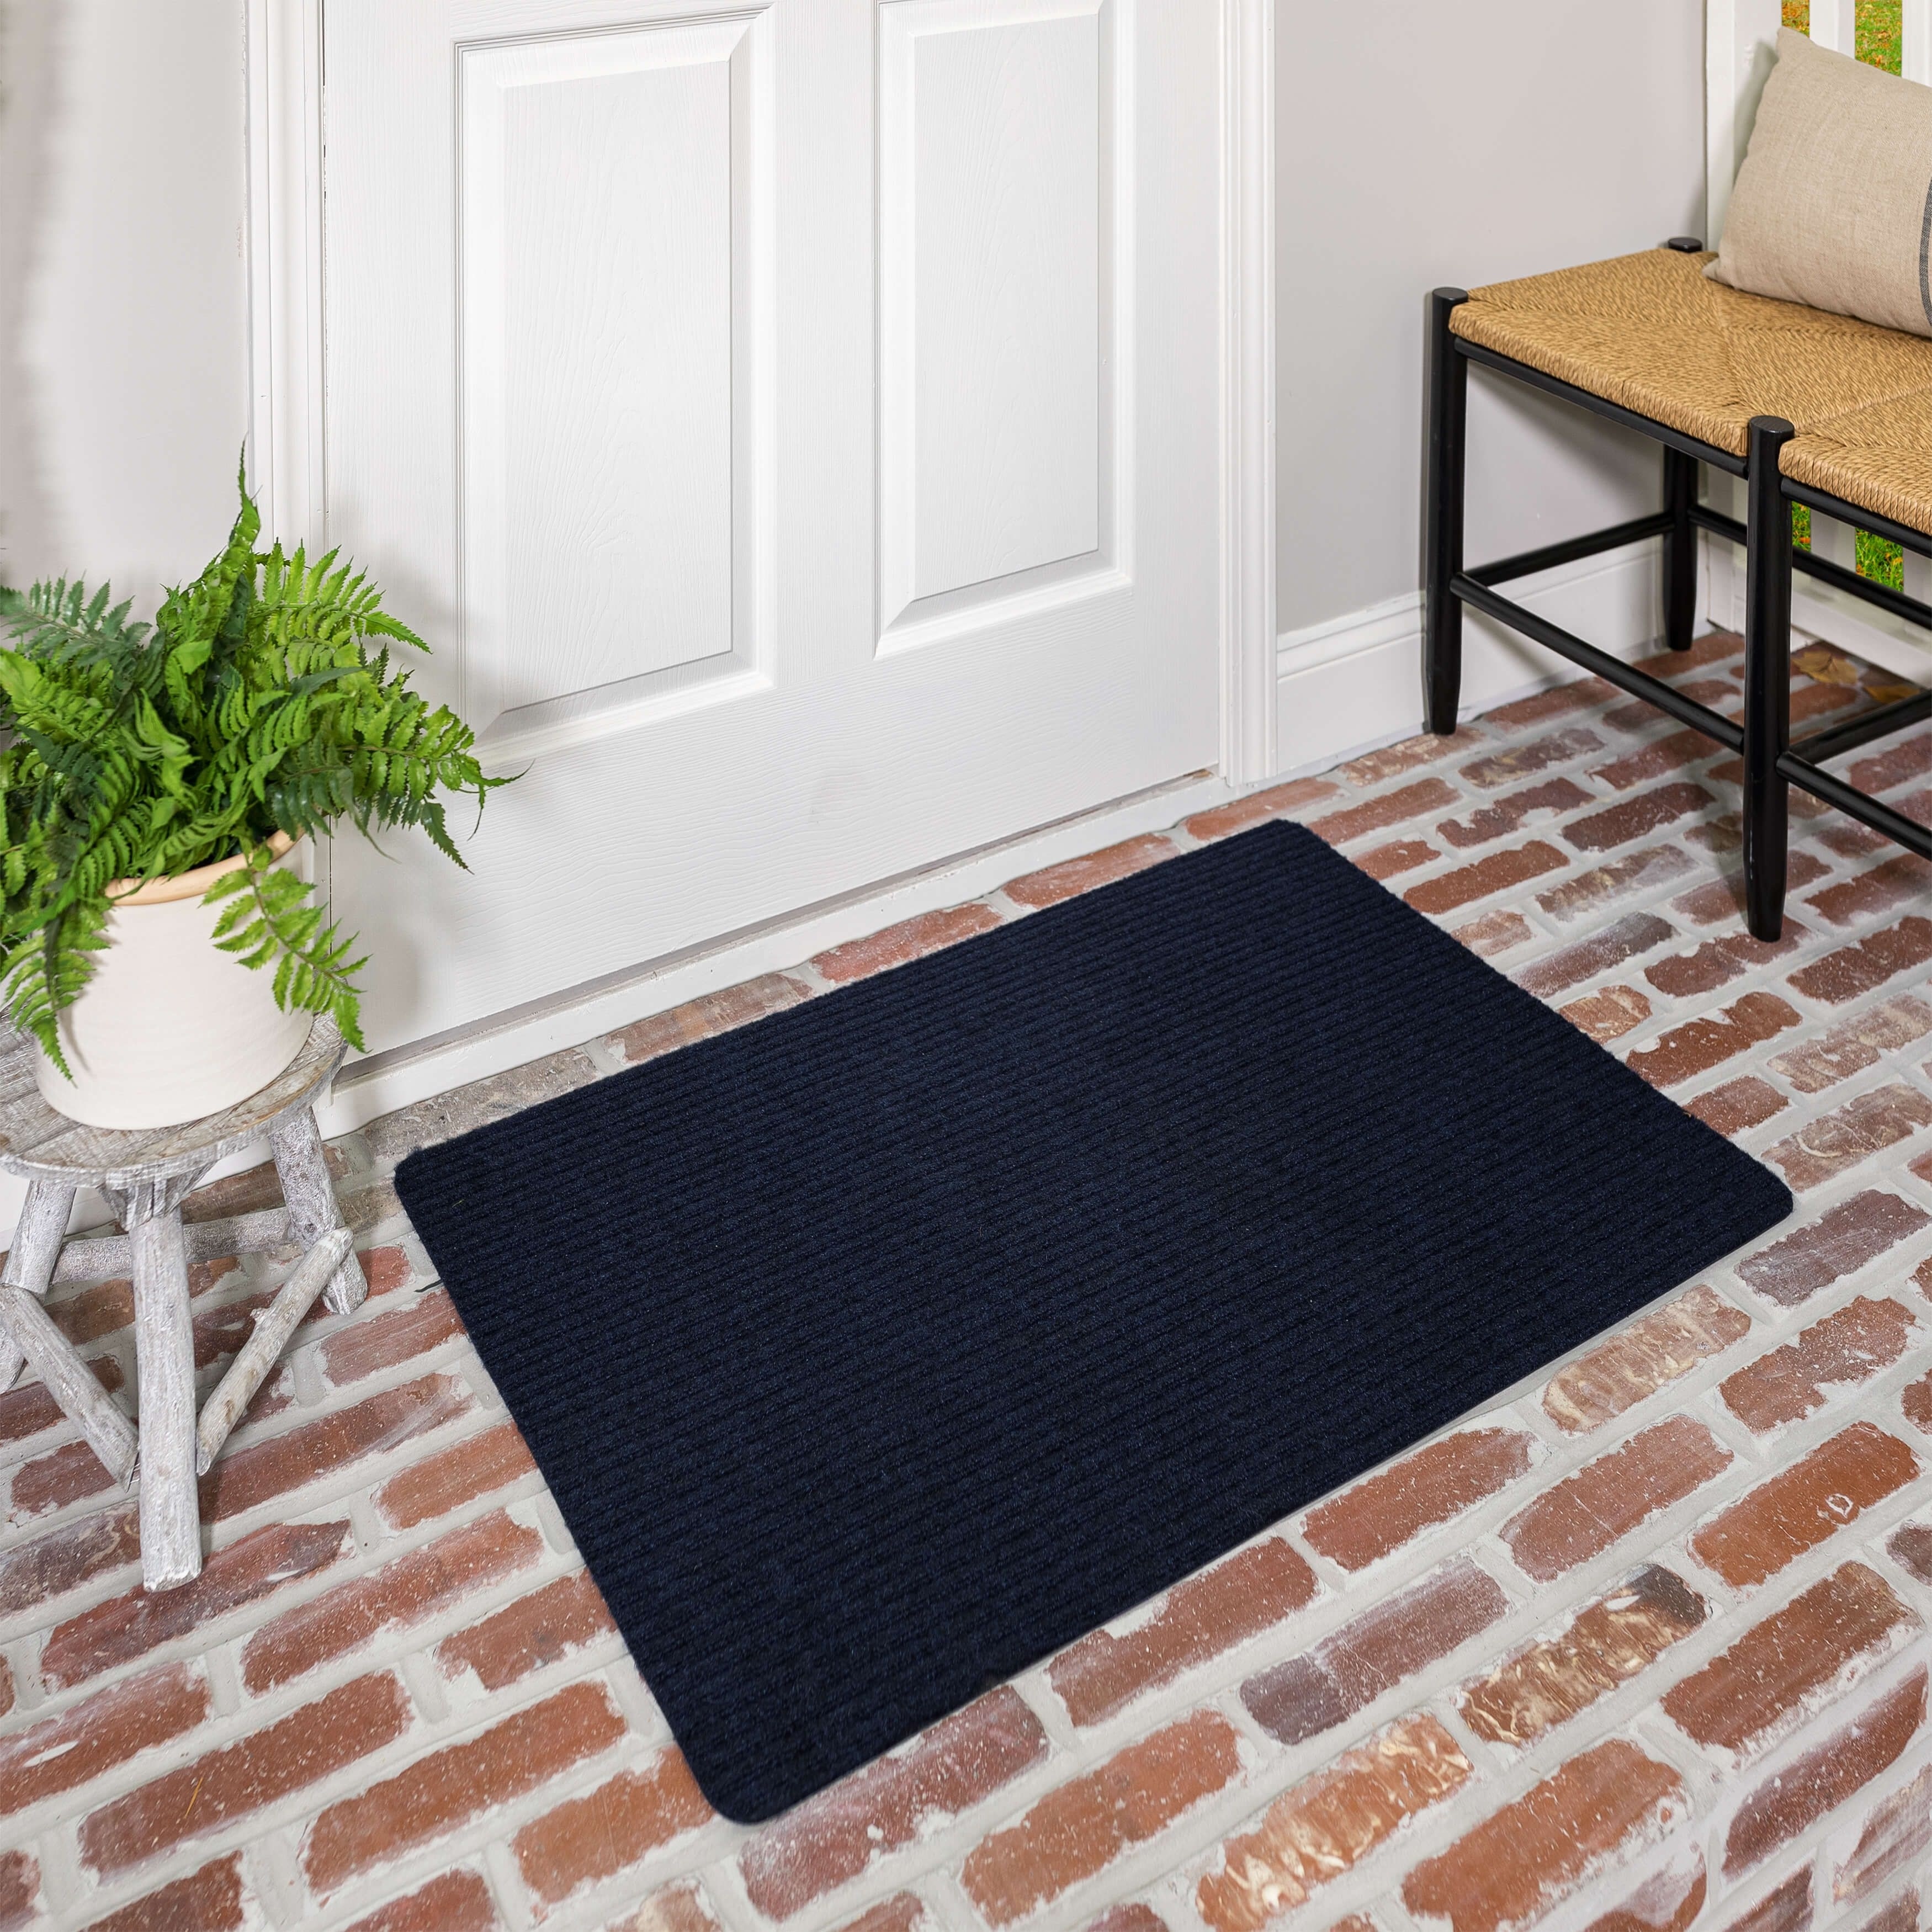 https://ak1.ostkcdn.com/images/products/is/images/direct/b703f2ee483355037c9d79a483b3f5a4759abf15/Mohawk-Home-Utility-Floor-Mat-for-Garage%2C-Entryway%2C-Porch%2C-and-Laundry-Room.jpg